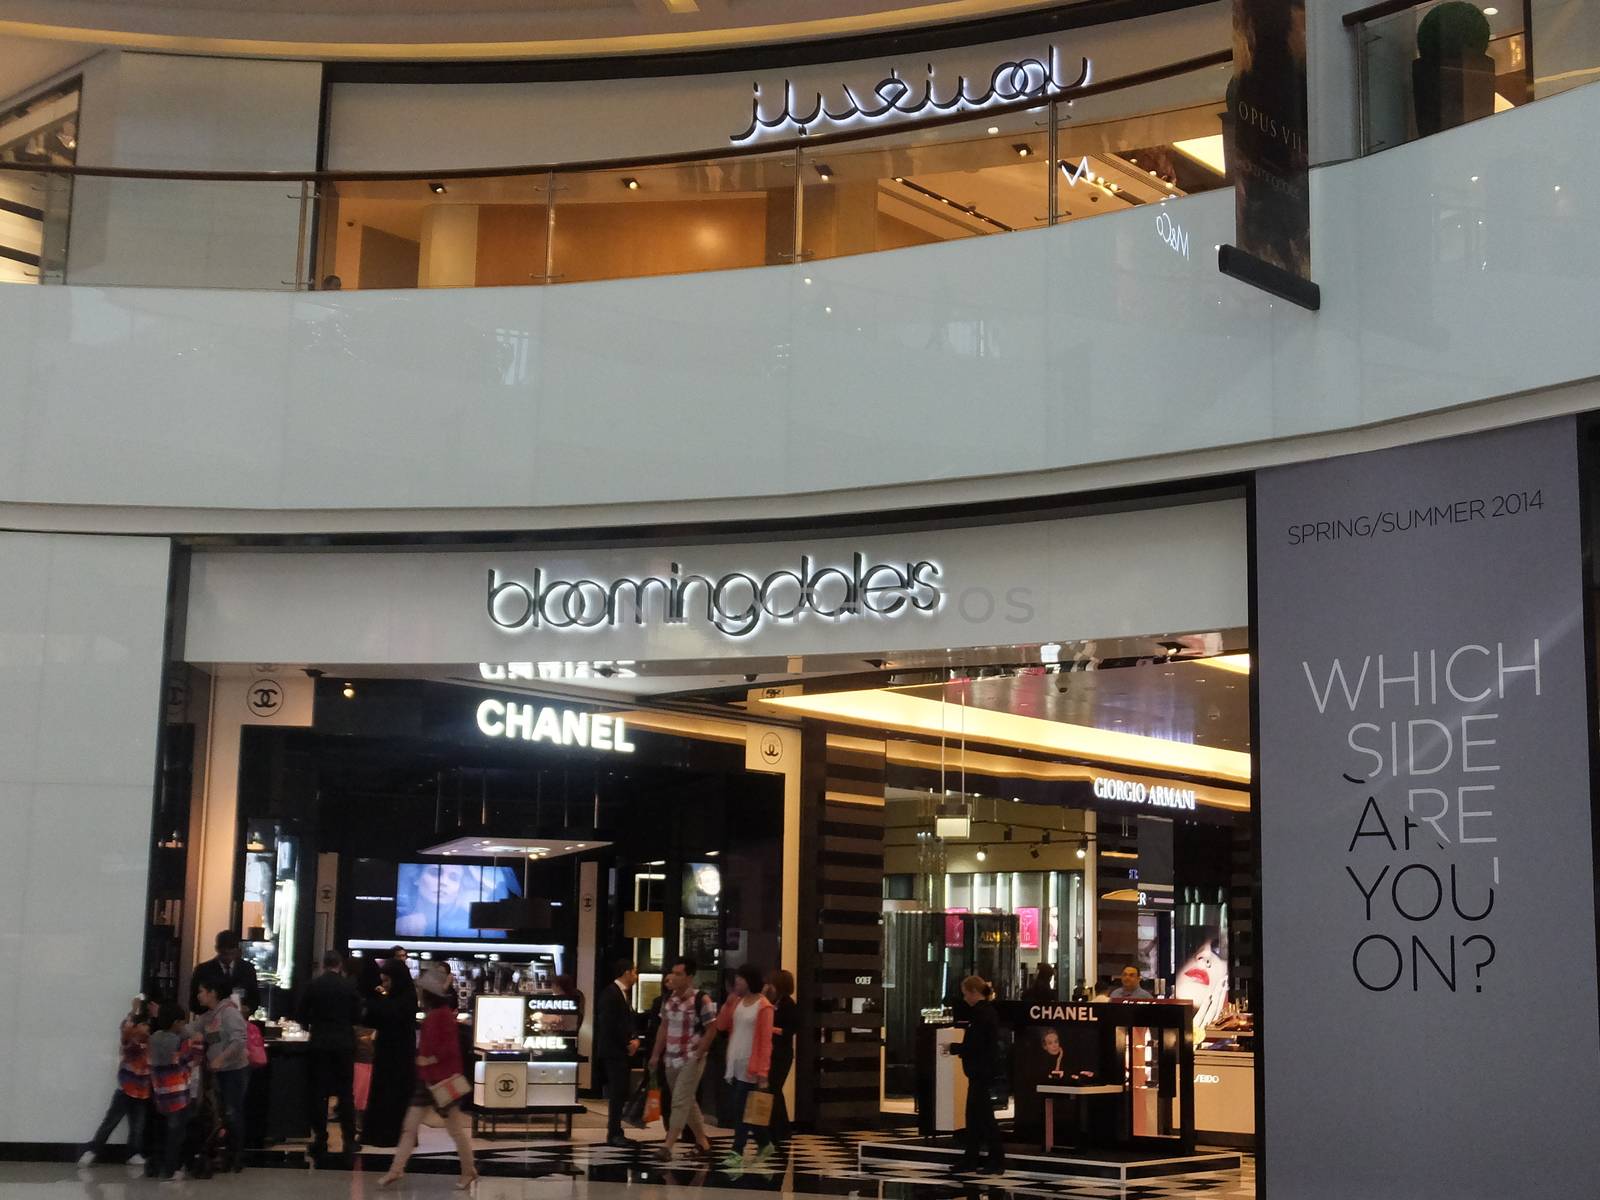 Bloomingdales at Dubai Mall in Dubai, UAE. The mall is the world's largest shopping mall based on total area and 6th largest by gross leasable area.